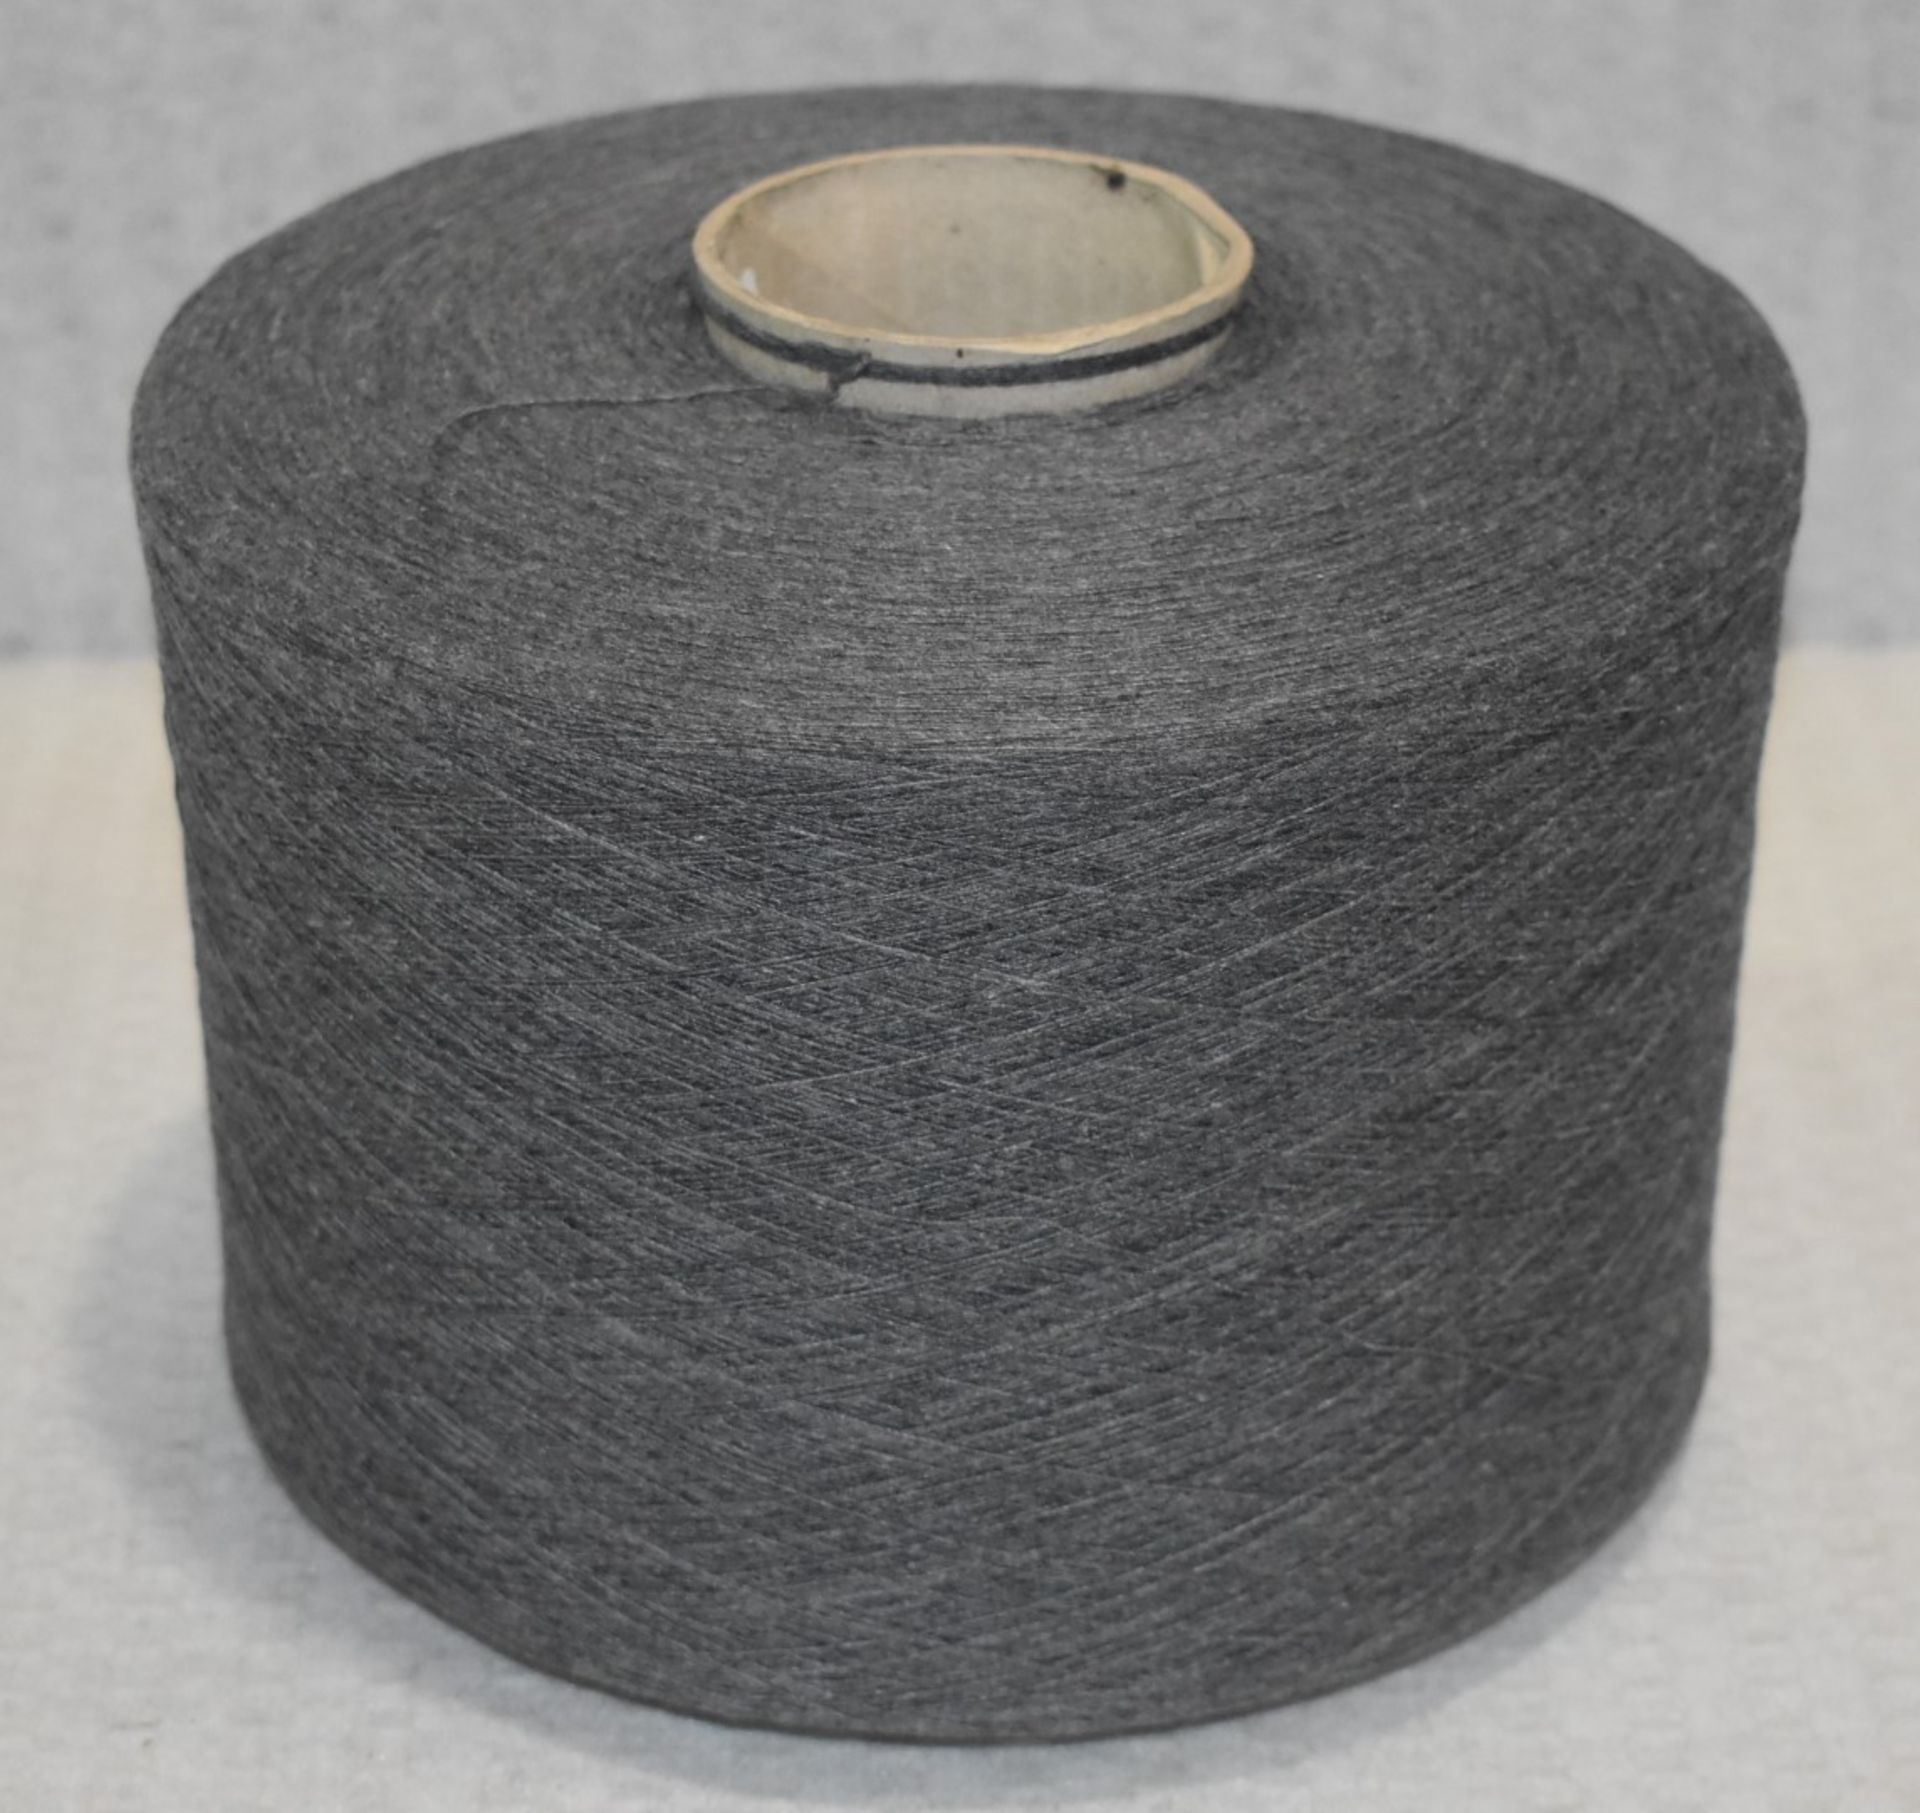 4 x Cones of 1/13 MicroCotton Knitting Yarn - Mid Grey - Approx Weight: 2,500g - New Stock ABL Yarn - Image 14 of 17